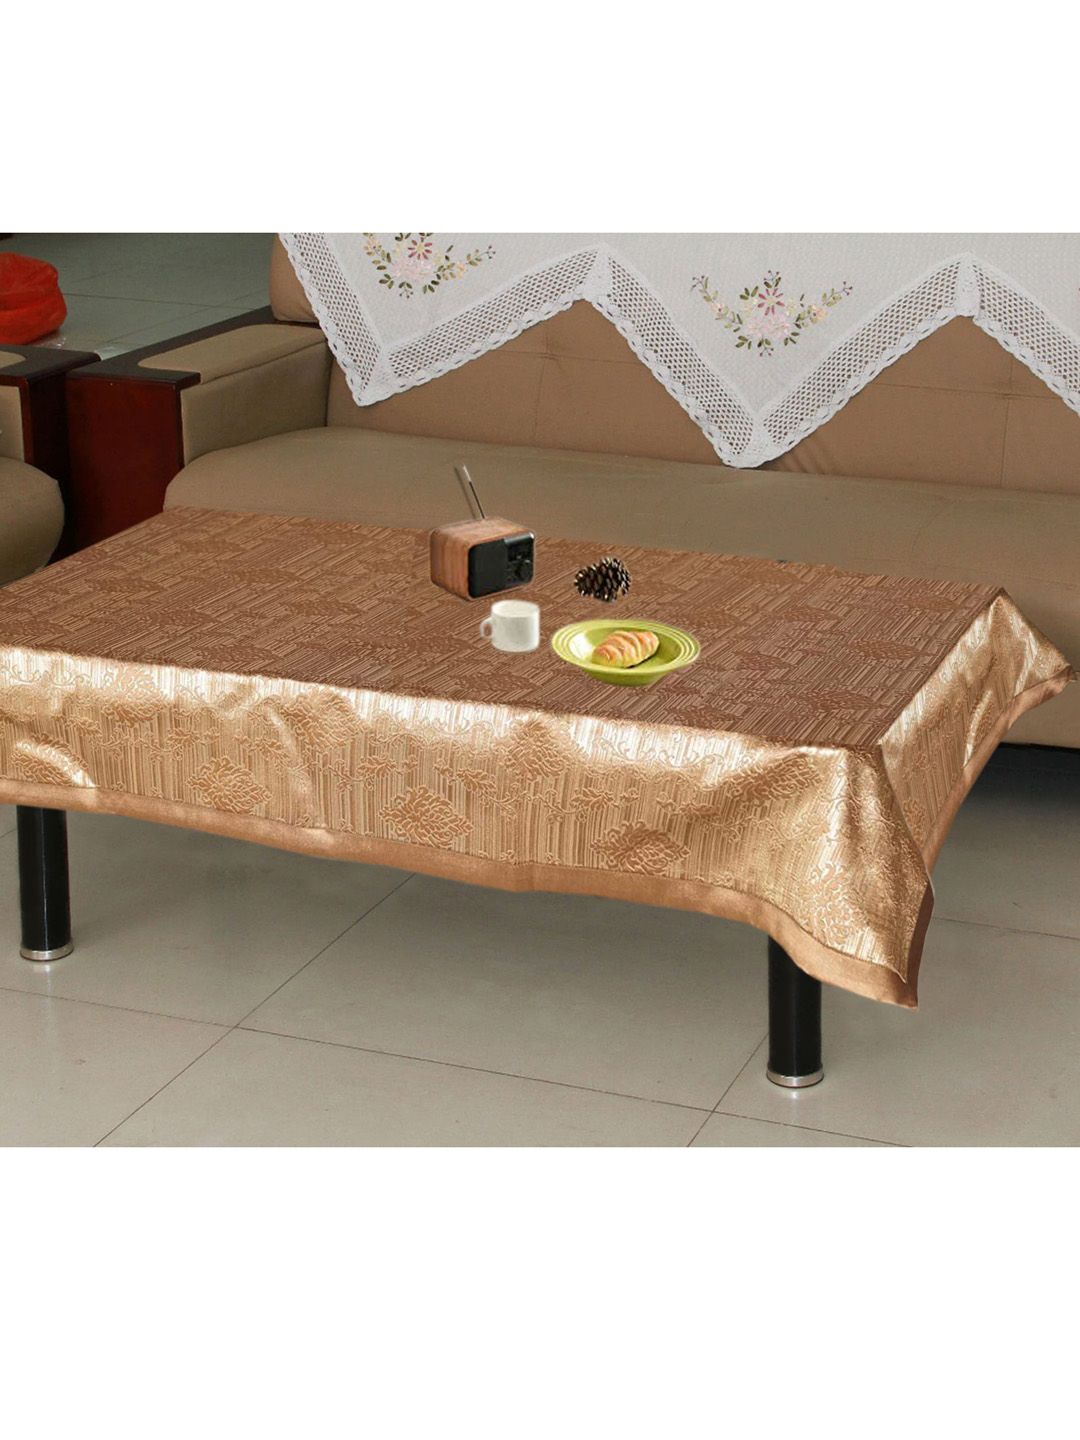 Lushomes Beige Self Design Jacquard 6-Seater Table Cover Price in India